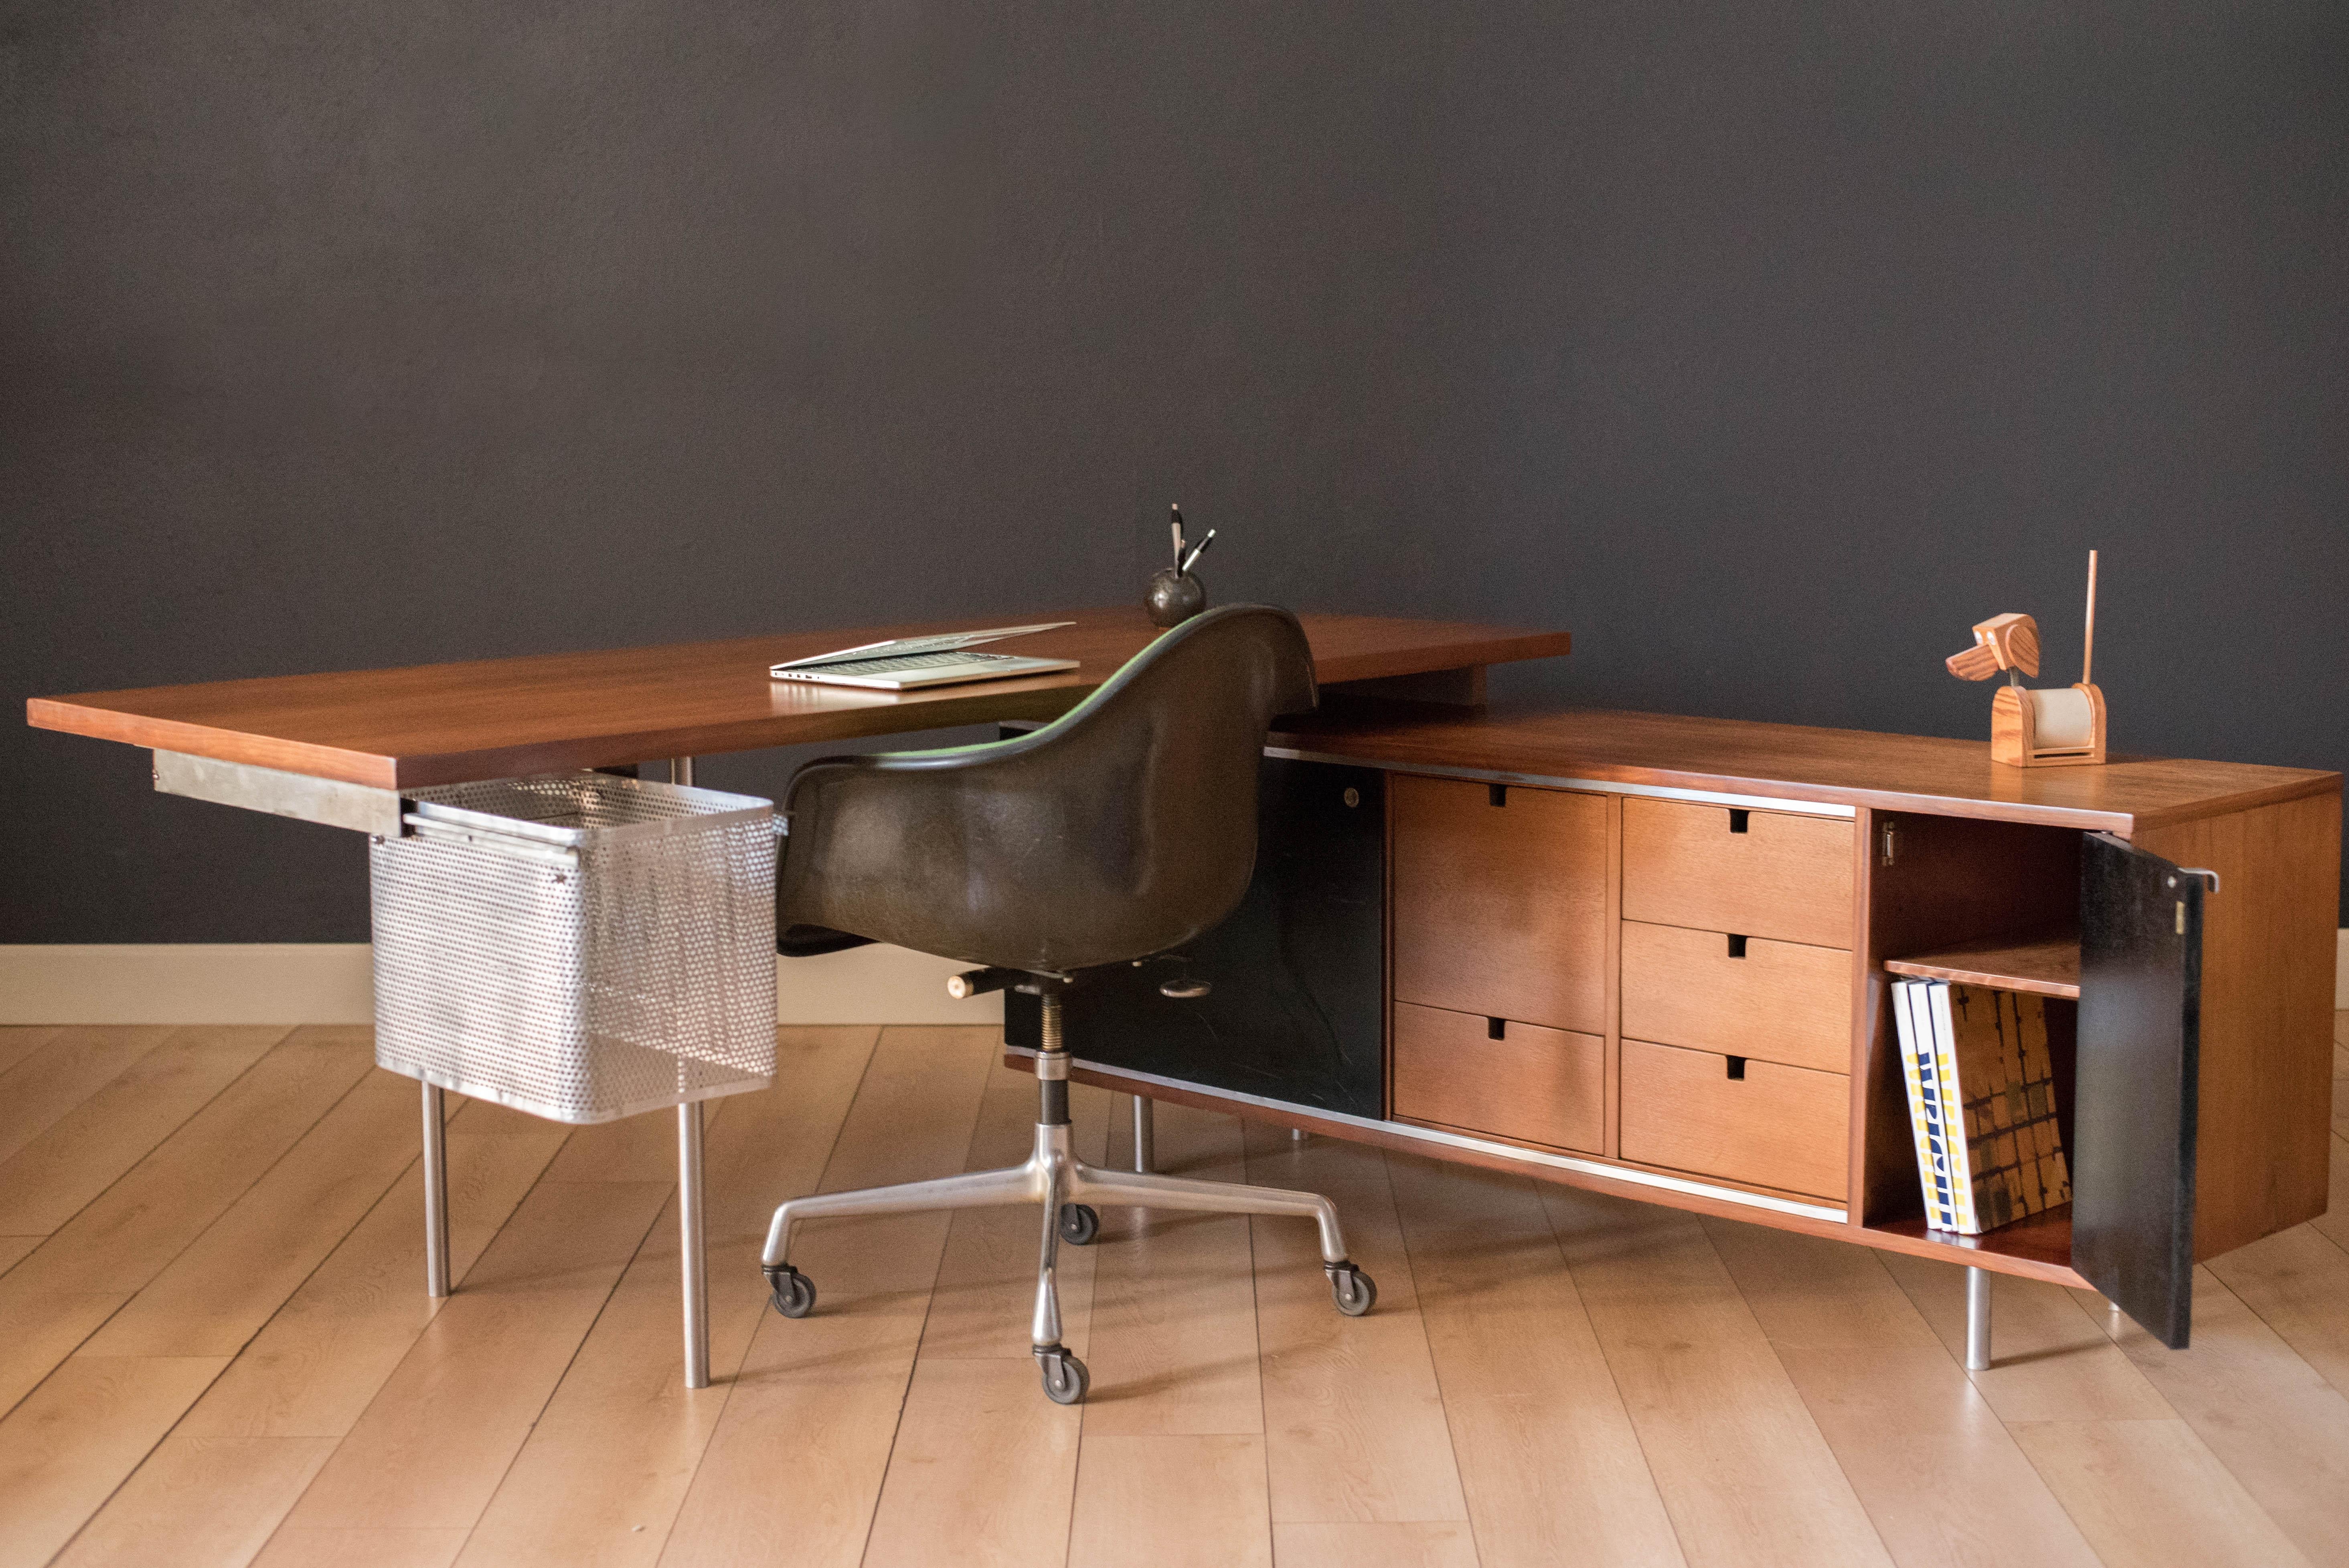 Vintage executive desk and return designed by George Nelson for Herman Miller in walnut. This floating desktop provides ample work surface space and plenty of storage solutions. Includes a rare metal extension filing basket with an additional filing